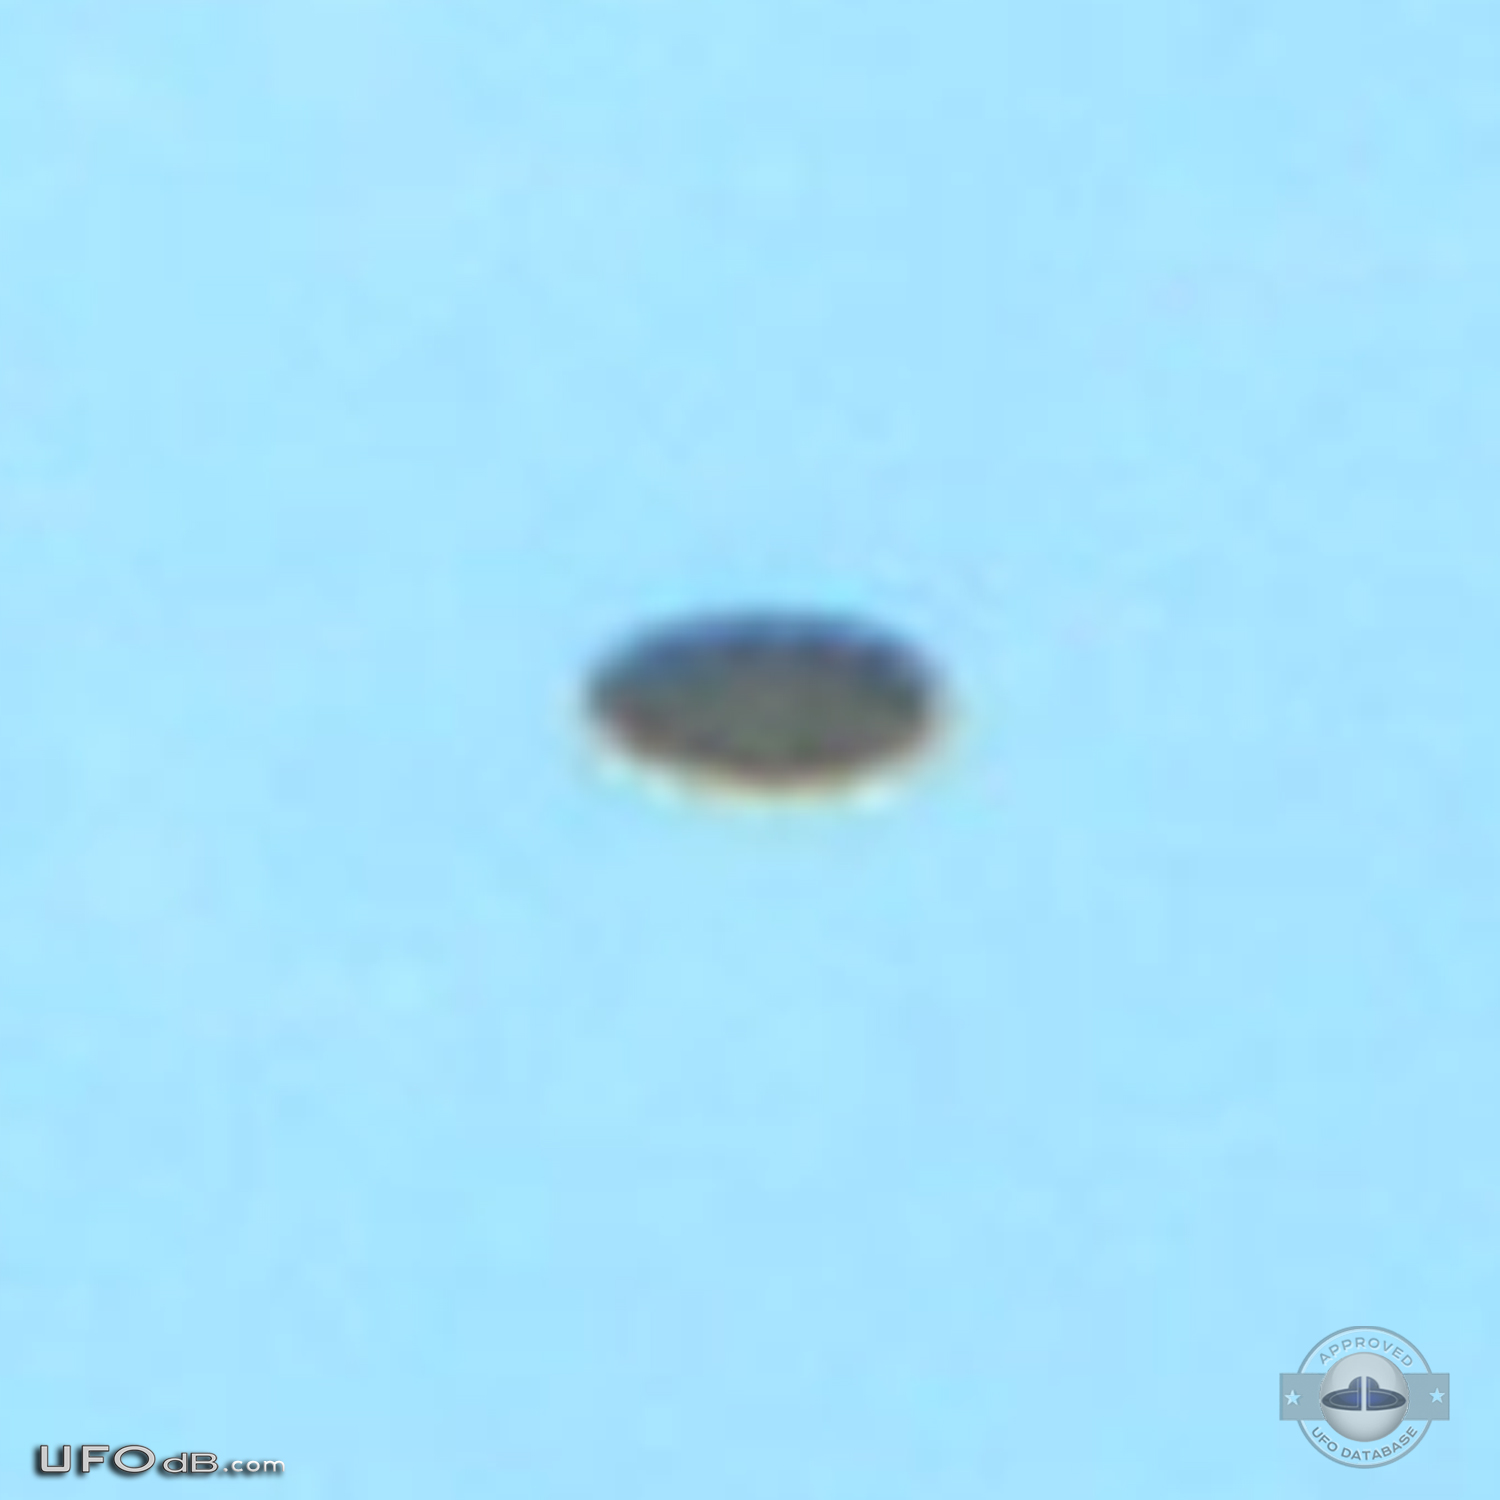 Picture from canal boat captures UFO passing over Amsterdam in 2008 UFO Picture #482-6